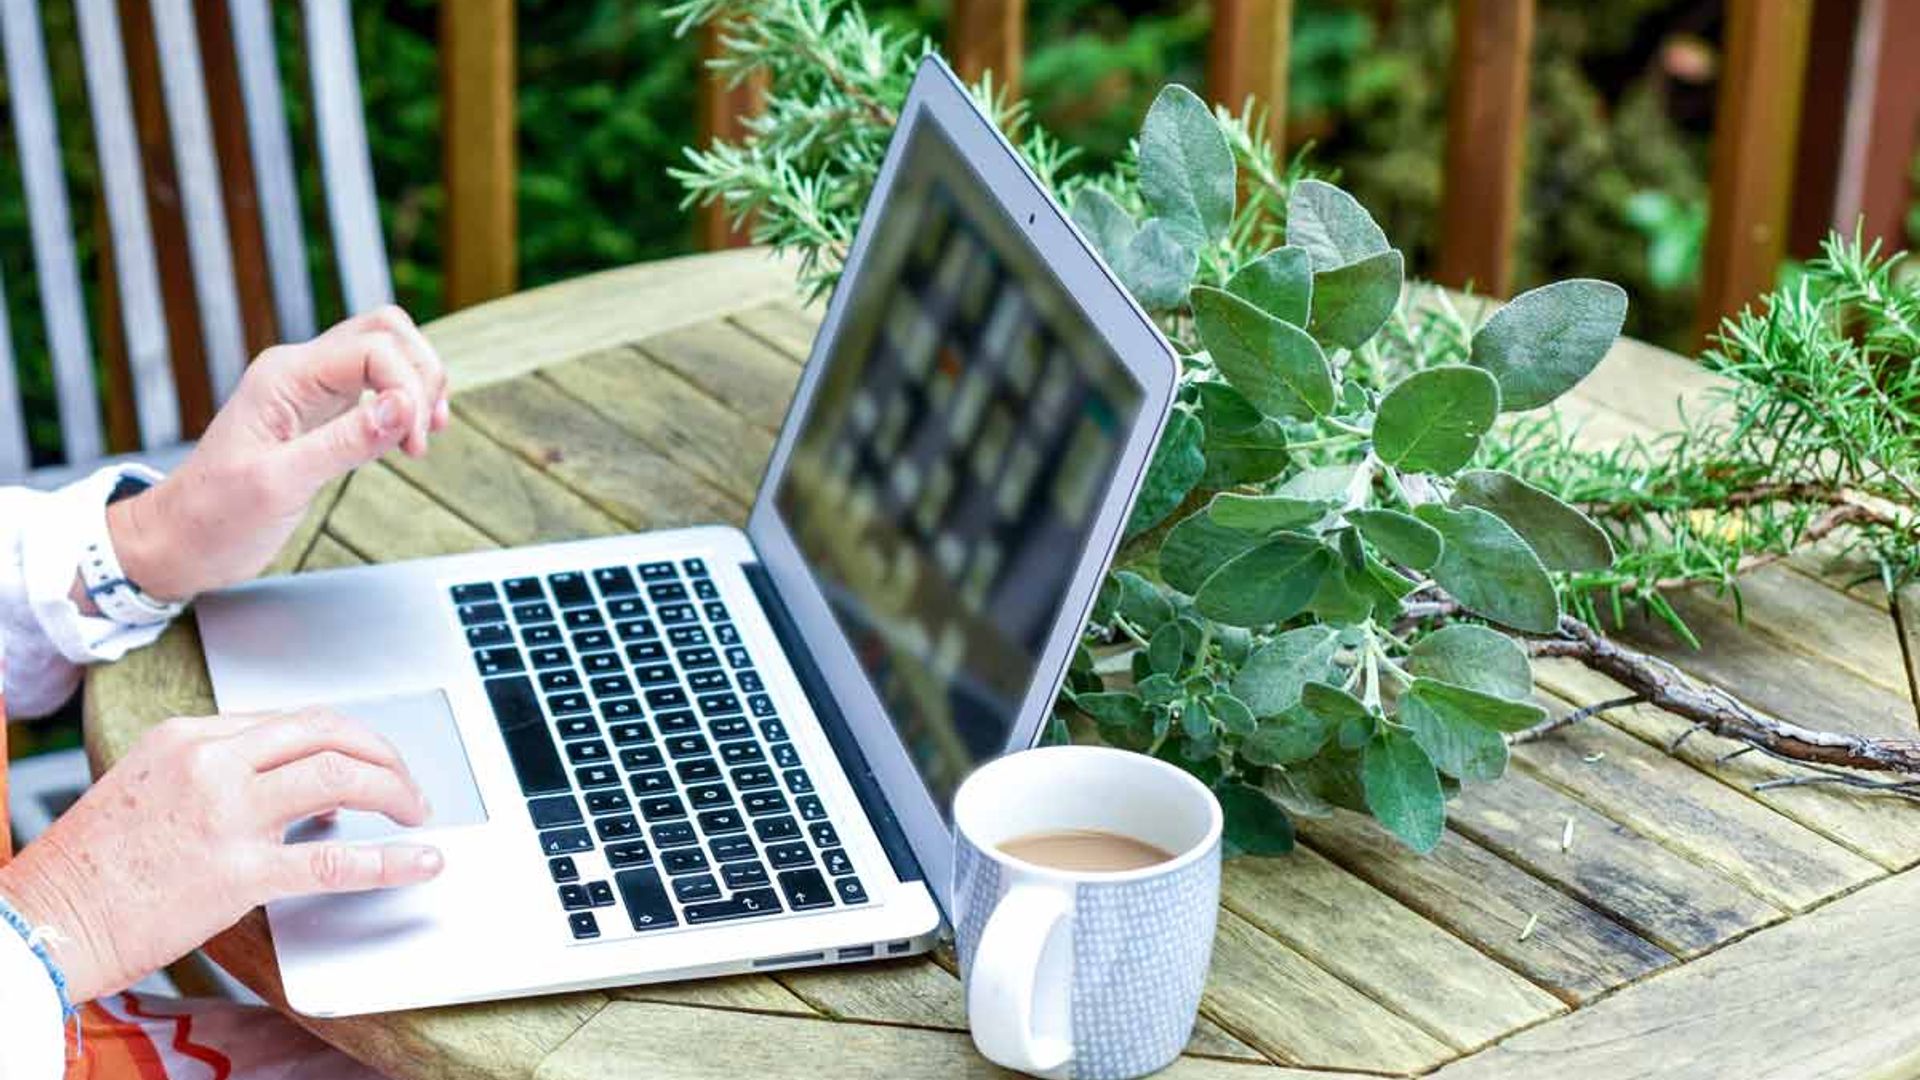 Working from home in the garden? This laptop sunshade will change your life